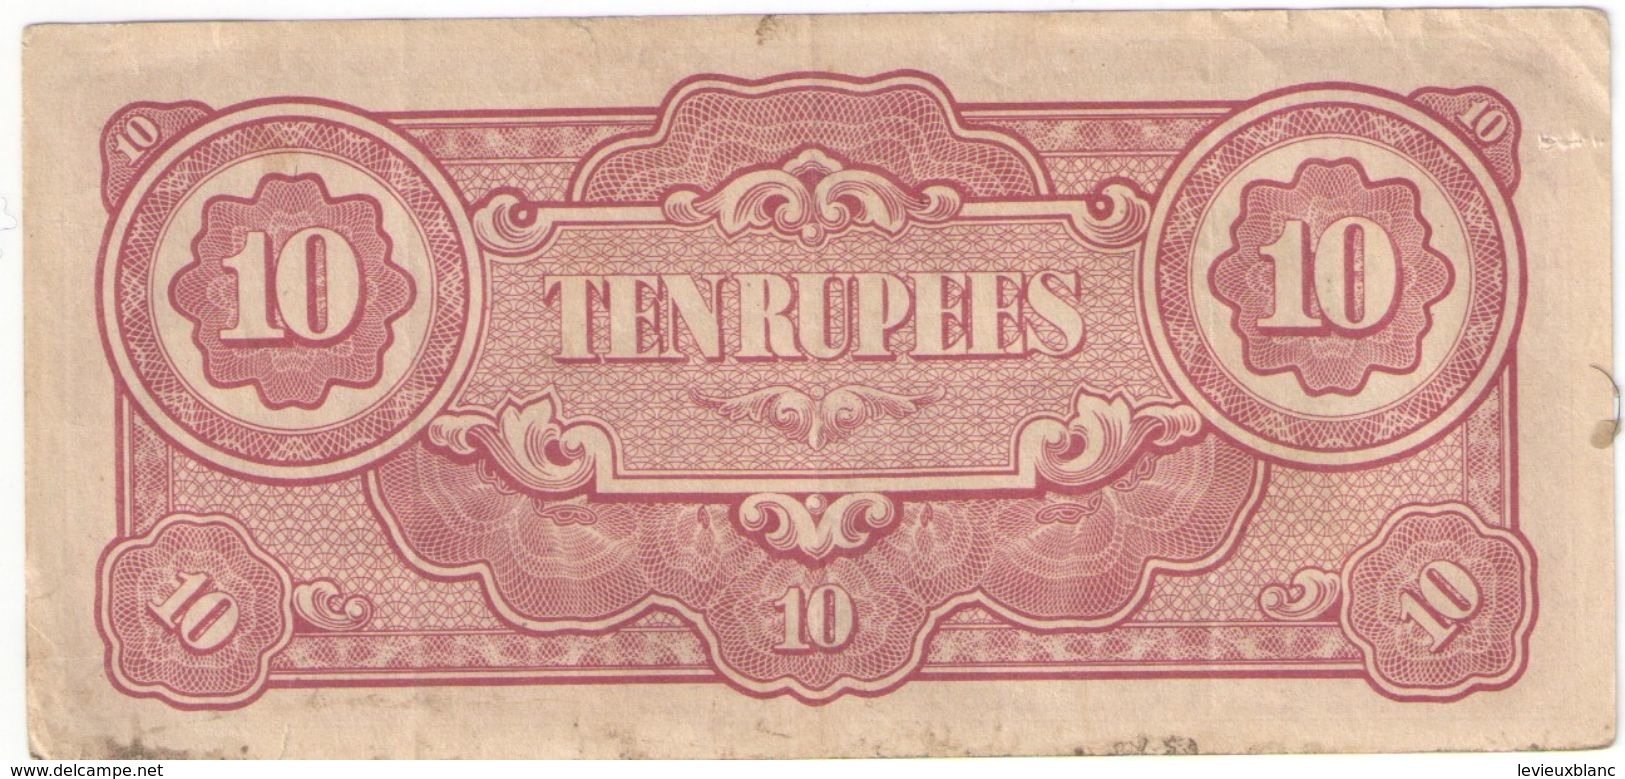 Ten Rupees/ The Japanese Government/Birmanie Occupation Japonaise/Vers 1940-42                  BILL184bis - Giappone